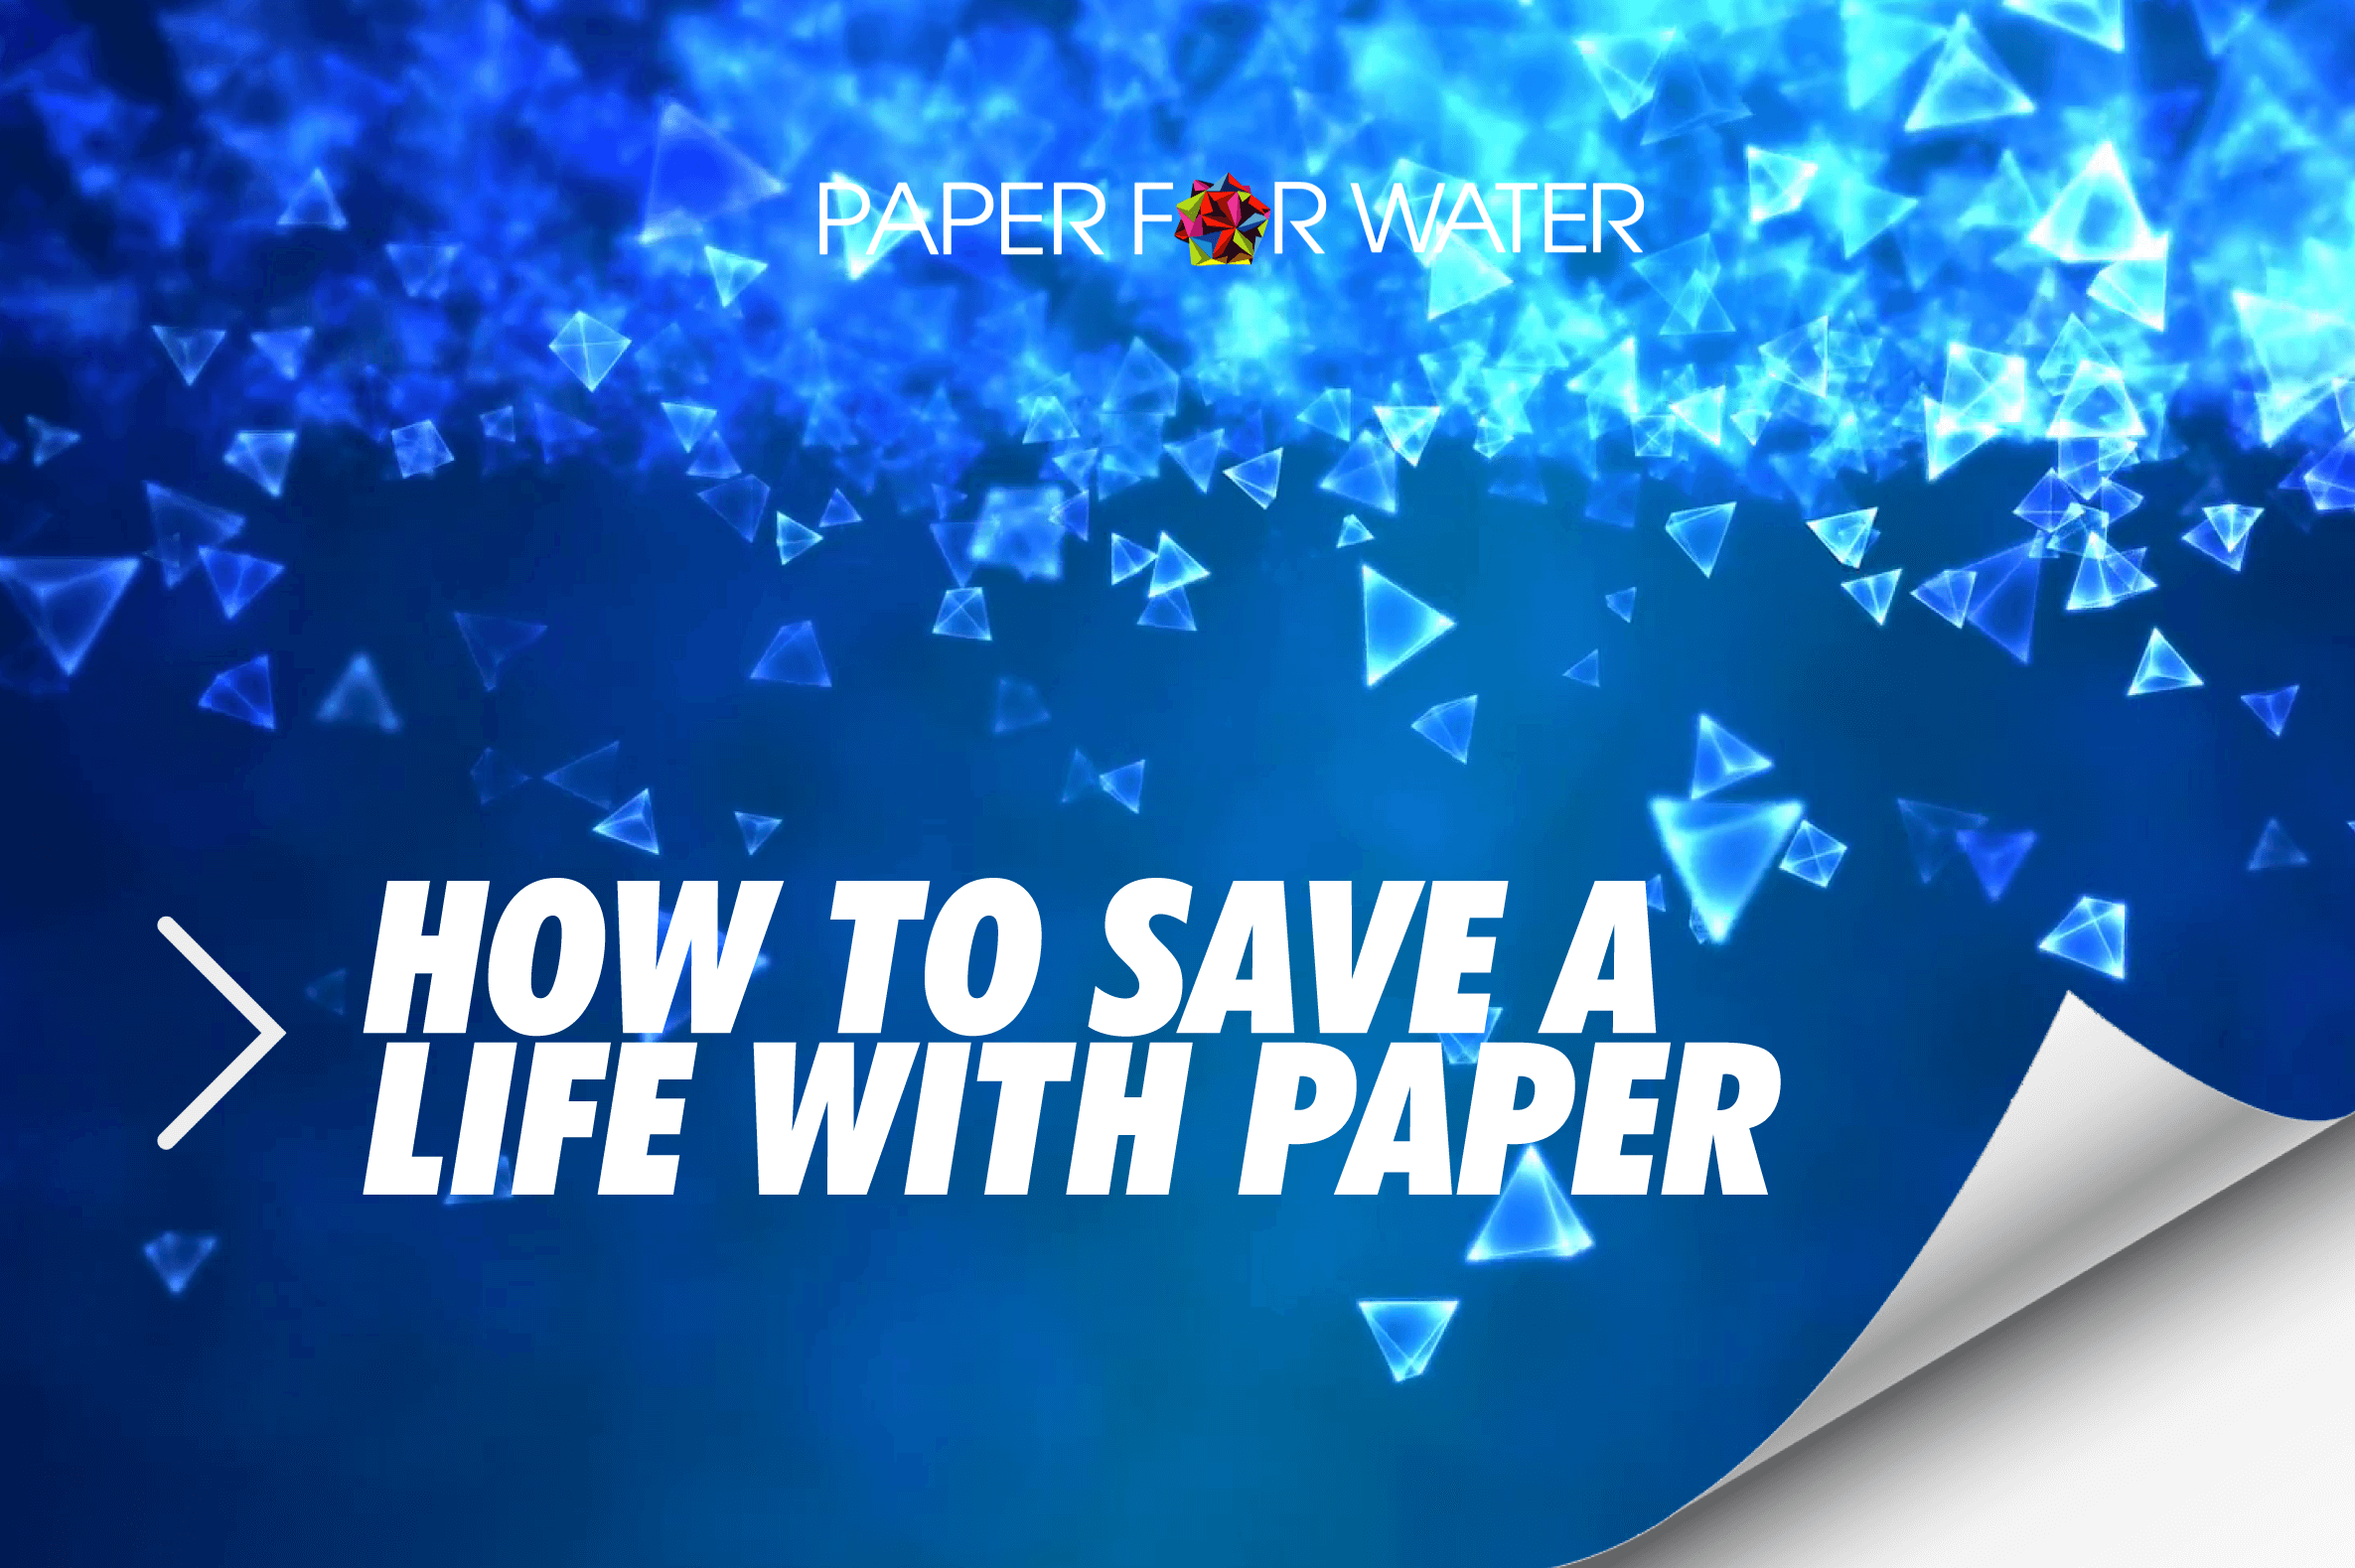 Paper for water how to make 1